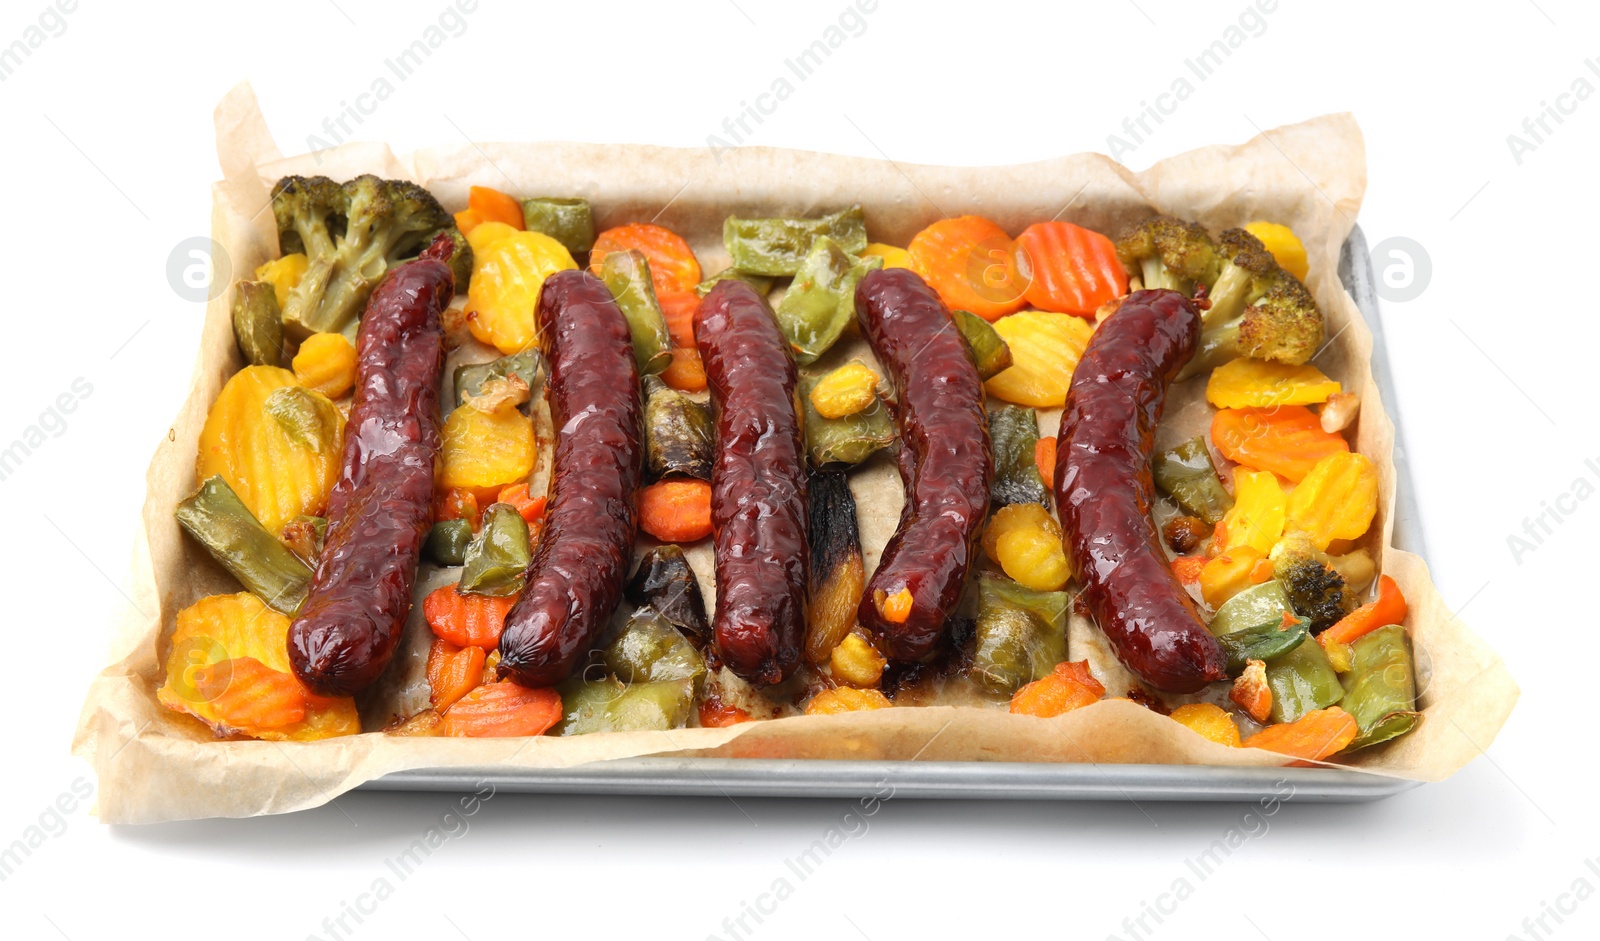 Photo of Baking tray with delicious smoked sausages and vegetables isolated on white